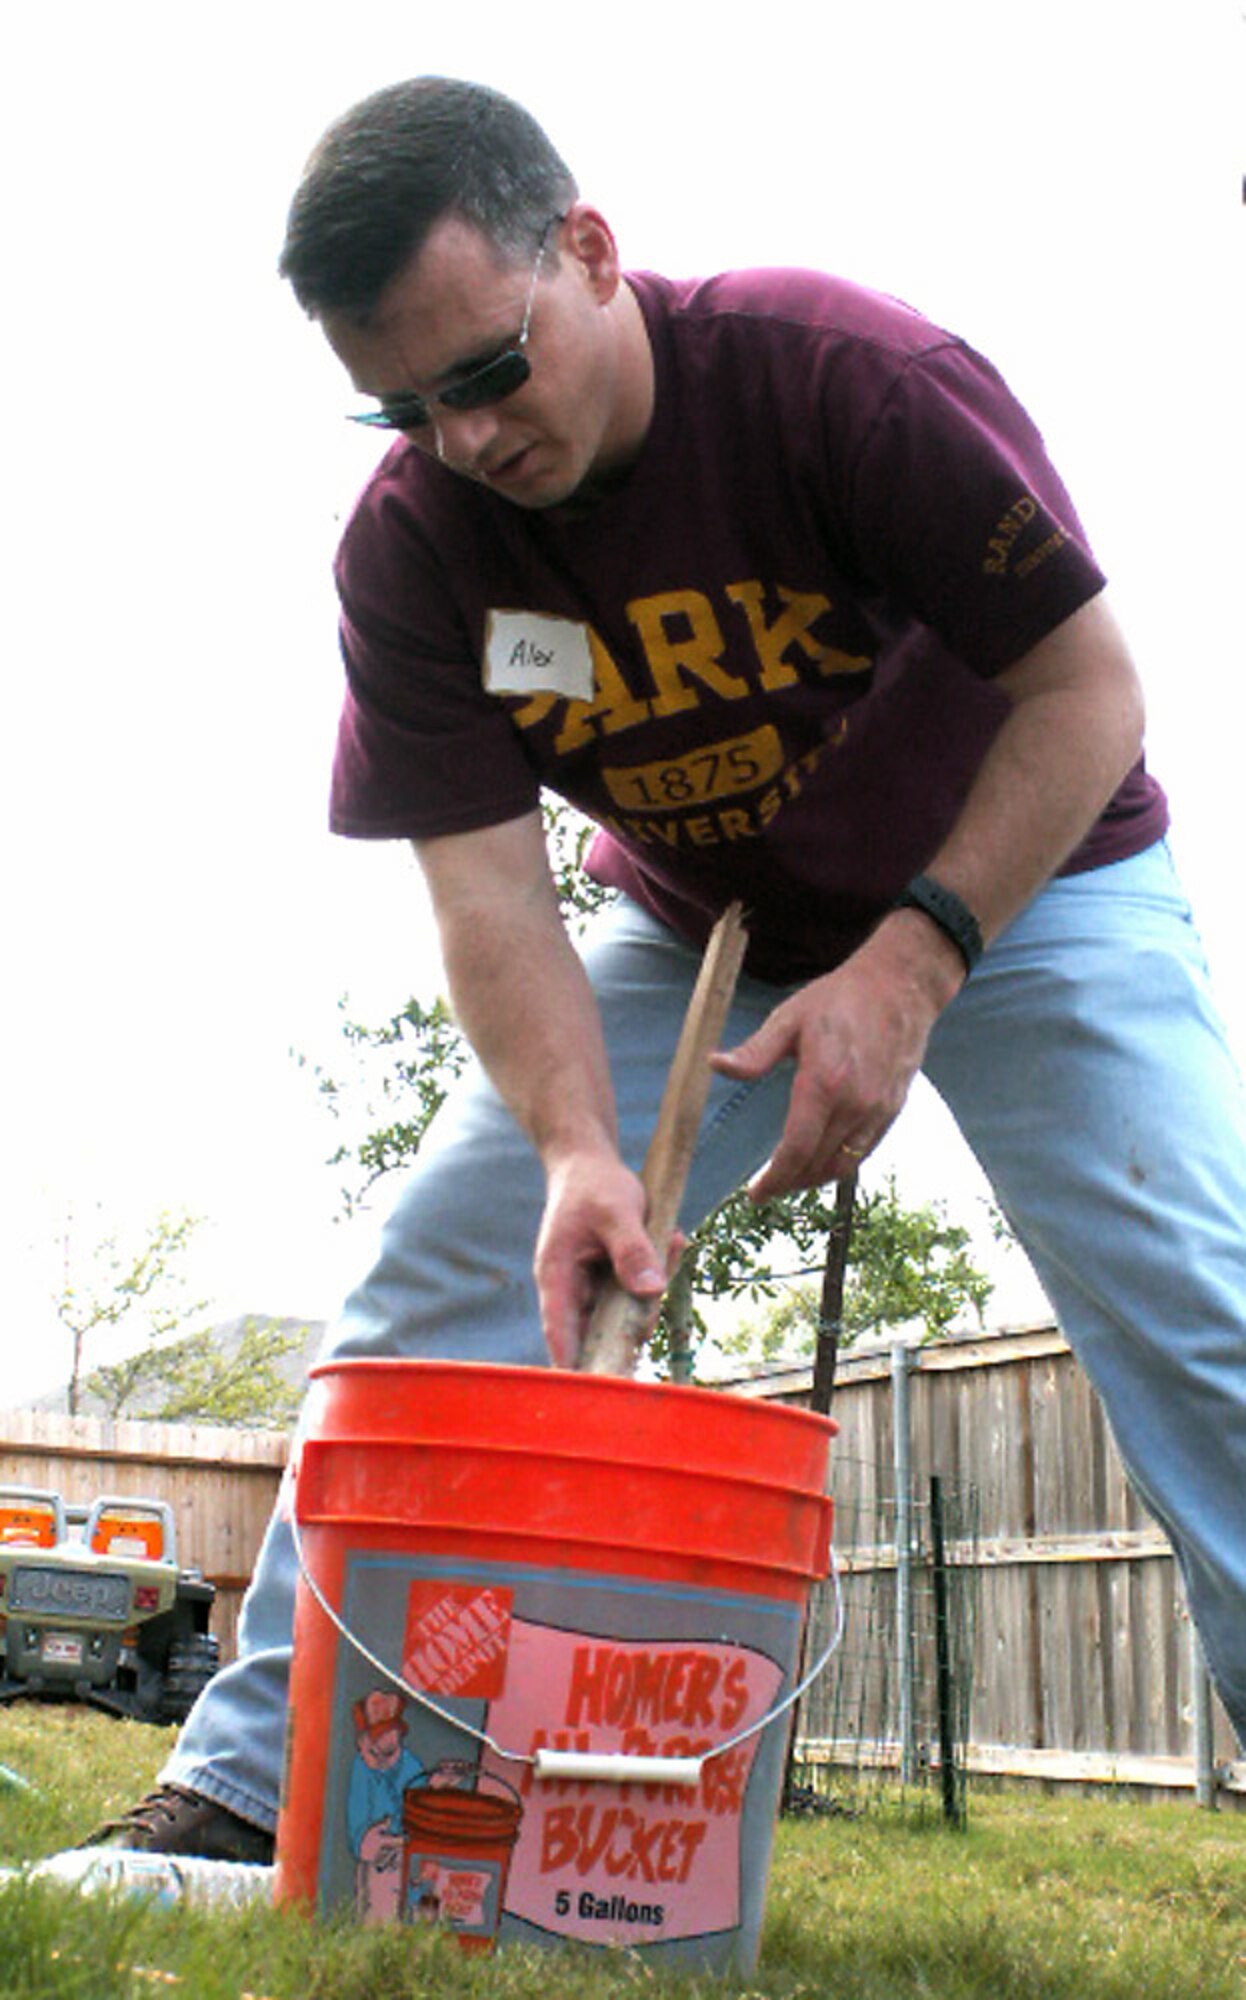 Master Sgt. Alex McCullough mixes cement to stabilize a fence post as part of a volunteer effort supporting Operation Homefront April 30 in Cibolo, Texas. Volunteers from the Top 3 Association from Air Force Personnel Center from Randolph Air Force Base, Texas, helped craft a gate to provide better access between the front and back yards for Tech. Sgt. Israel Del Toro, an Airman recovering from wounds sustained during a roadside bombing in Afghanistan. Sergeant McCullough is a personnelist at AFPC. (U.S. Air Force photo/Master Sgt. Kat Bailey)
